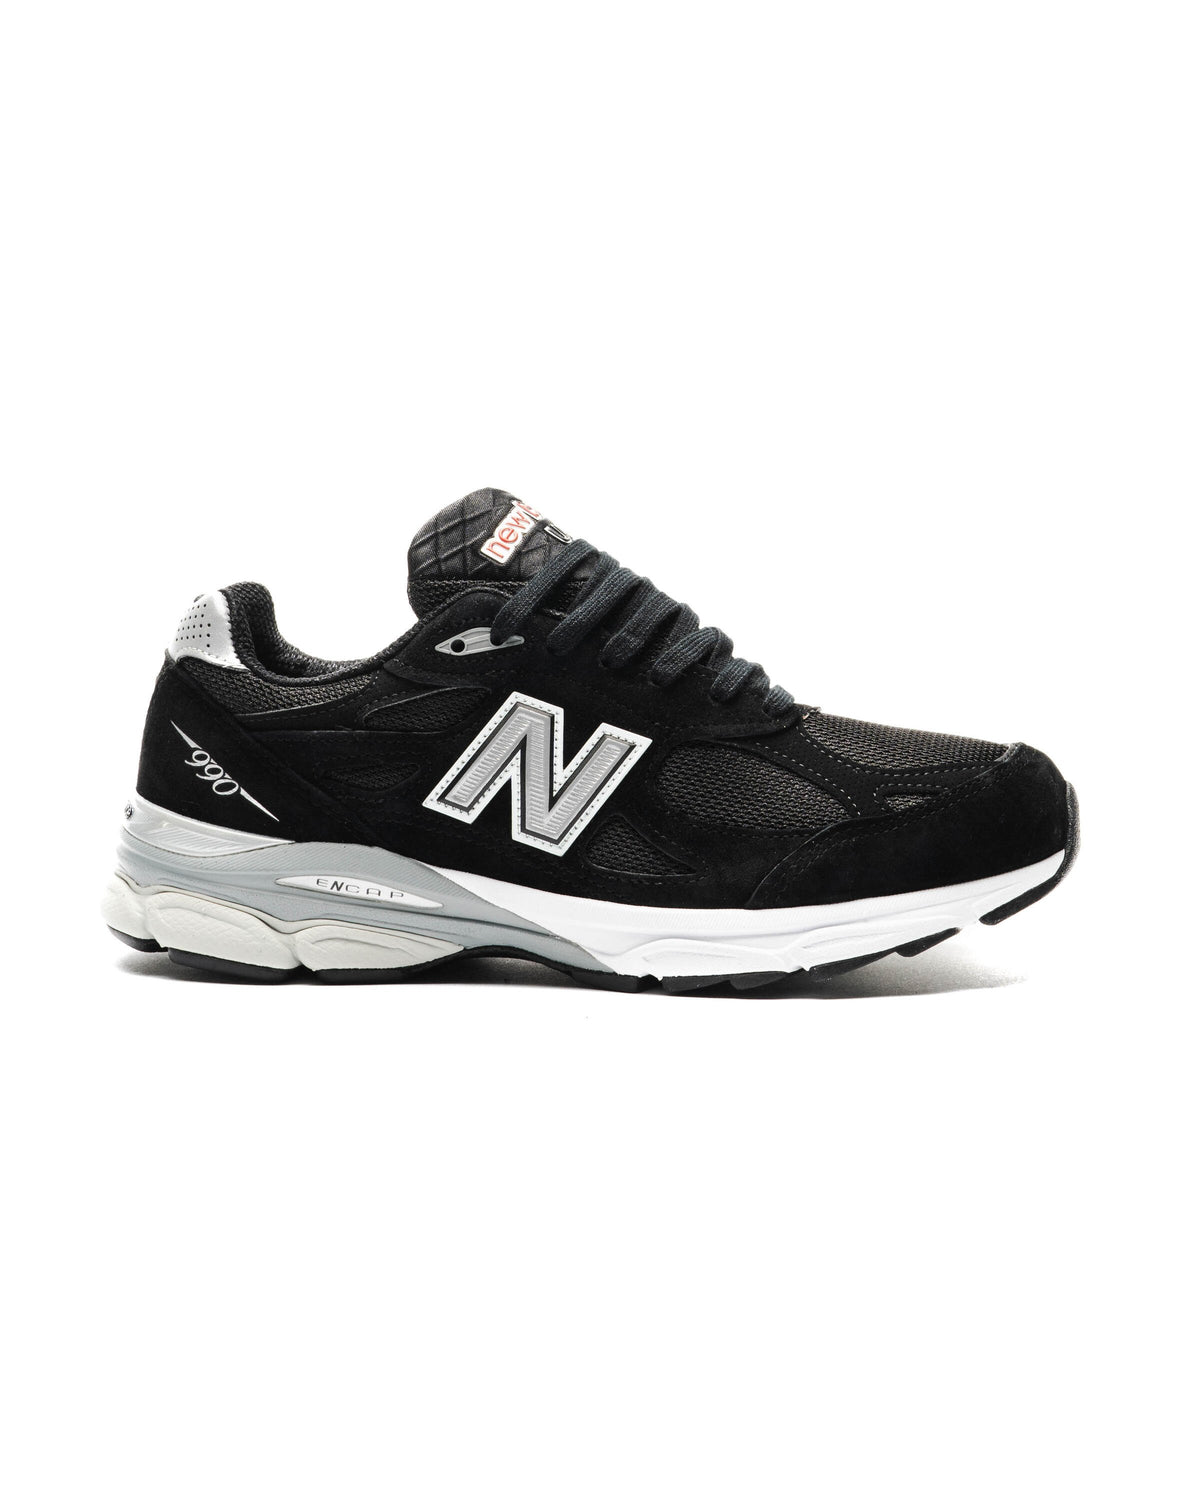 New Balance M 990 BS3 - Made in USA